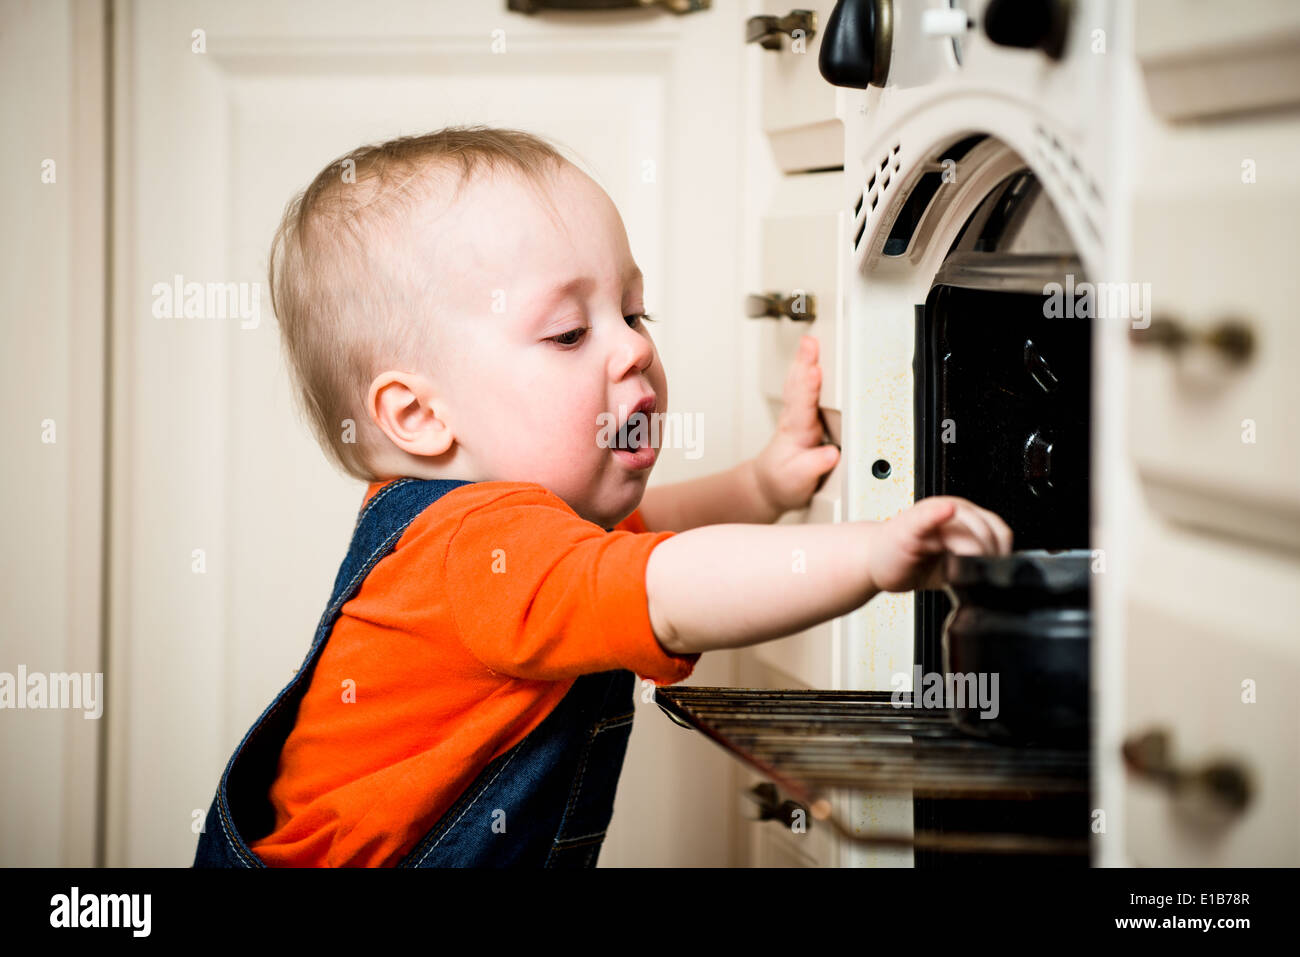 Dangerous situation - little baby opened kitchen oven Stock Photo